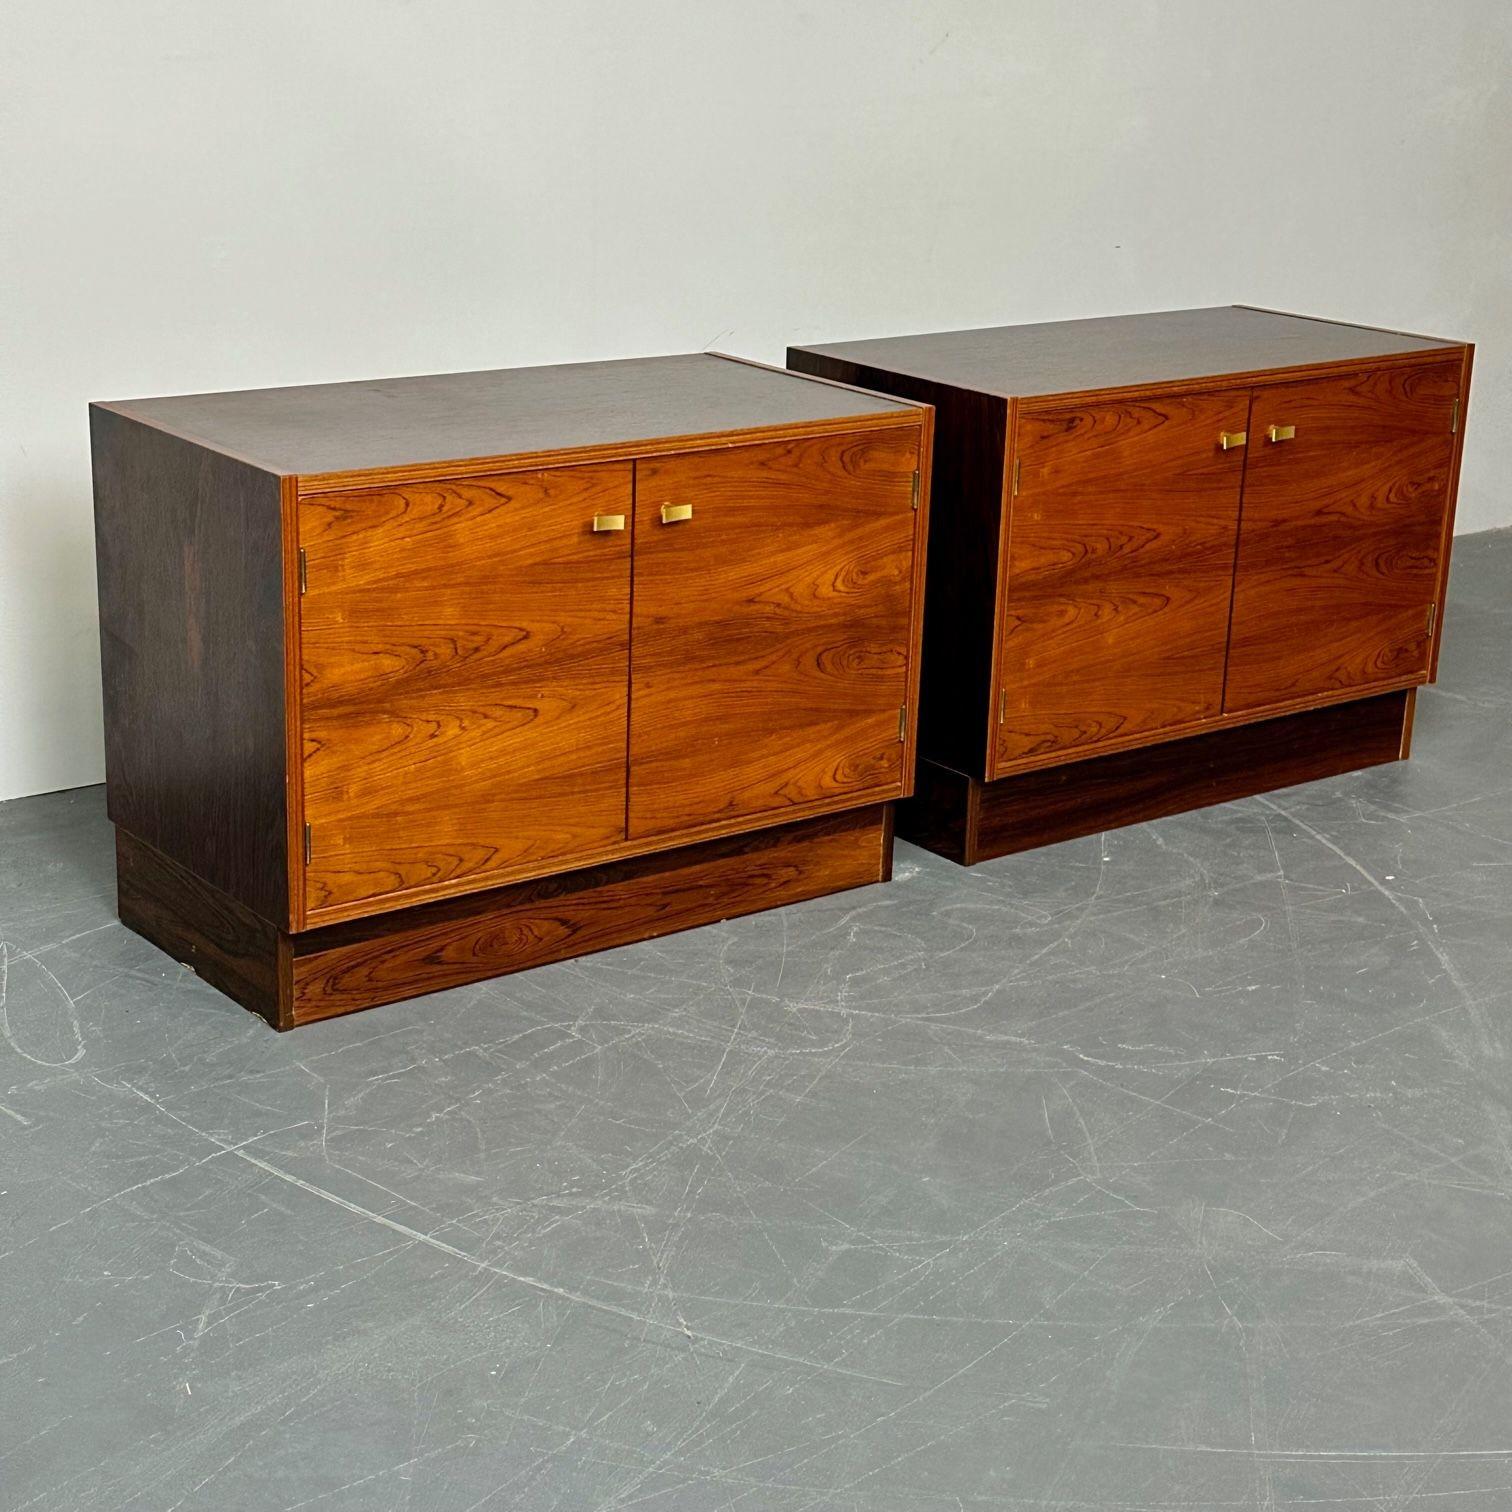 American Pair Mid-Century Modern Rosewood Nightstands / Cabinets, Chests Brass Pulls